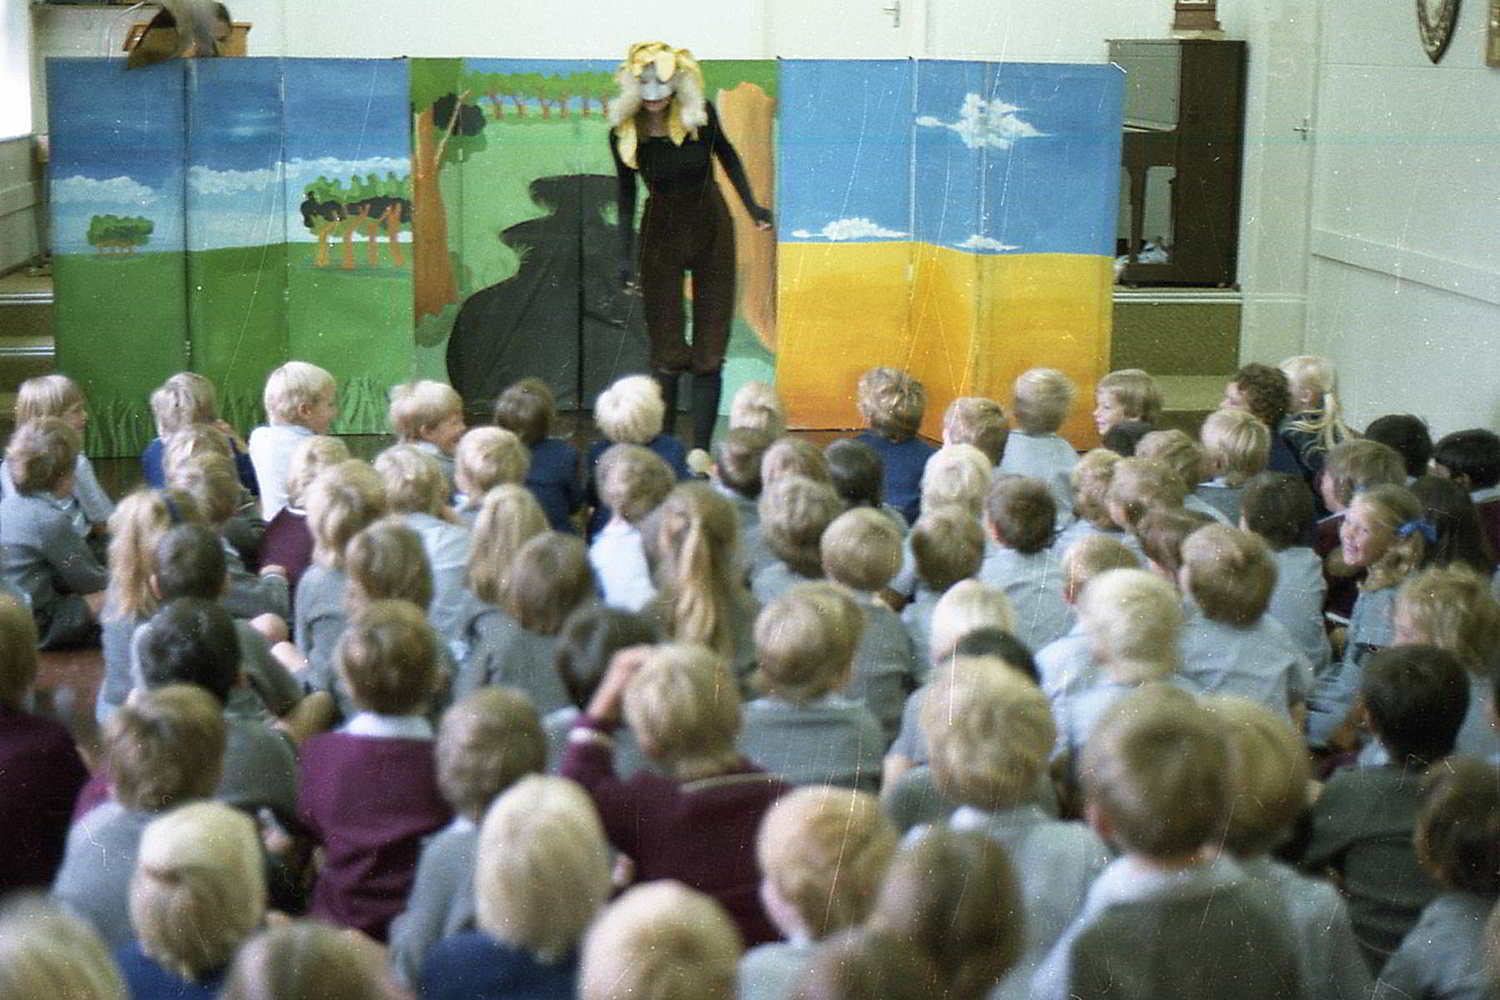 The Bunyip of Berkeley's Creek, Handspan Theatre Actor masked actor in front of stage flats painted with simple landscape, speaking to large group of children in classroom